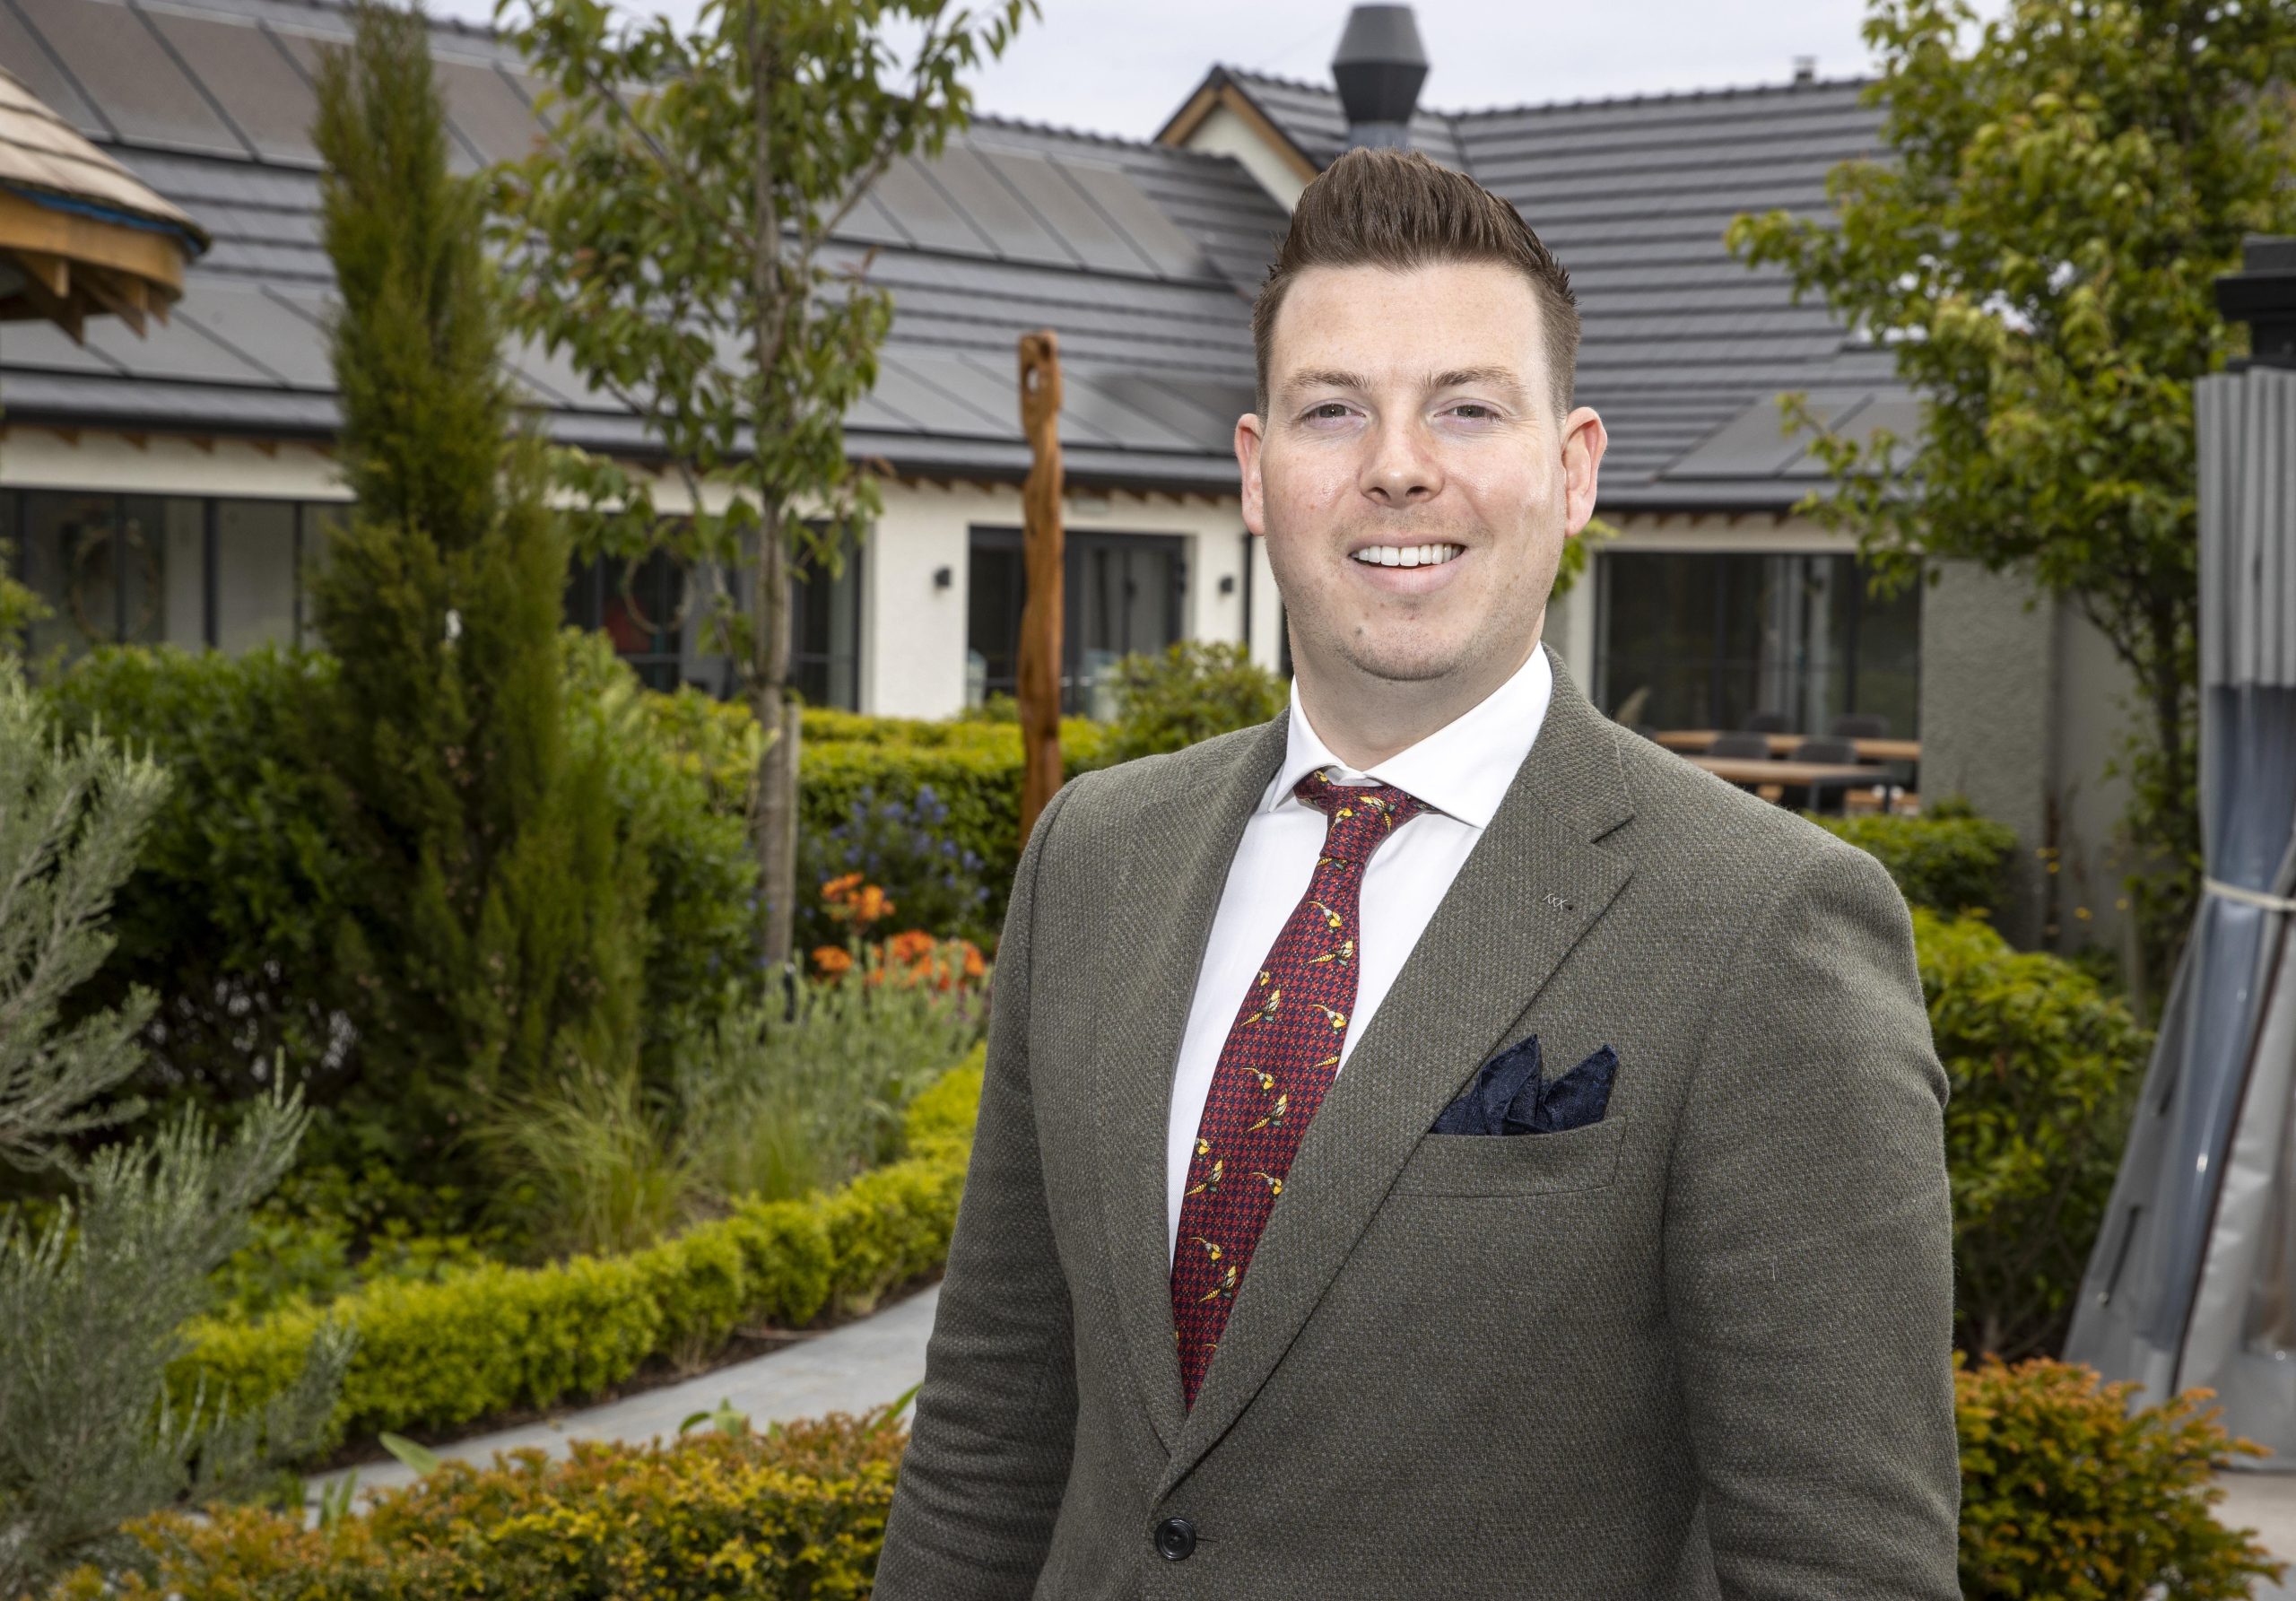 Salthouse Hotel to add 32 new suites in £3.5m expansion